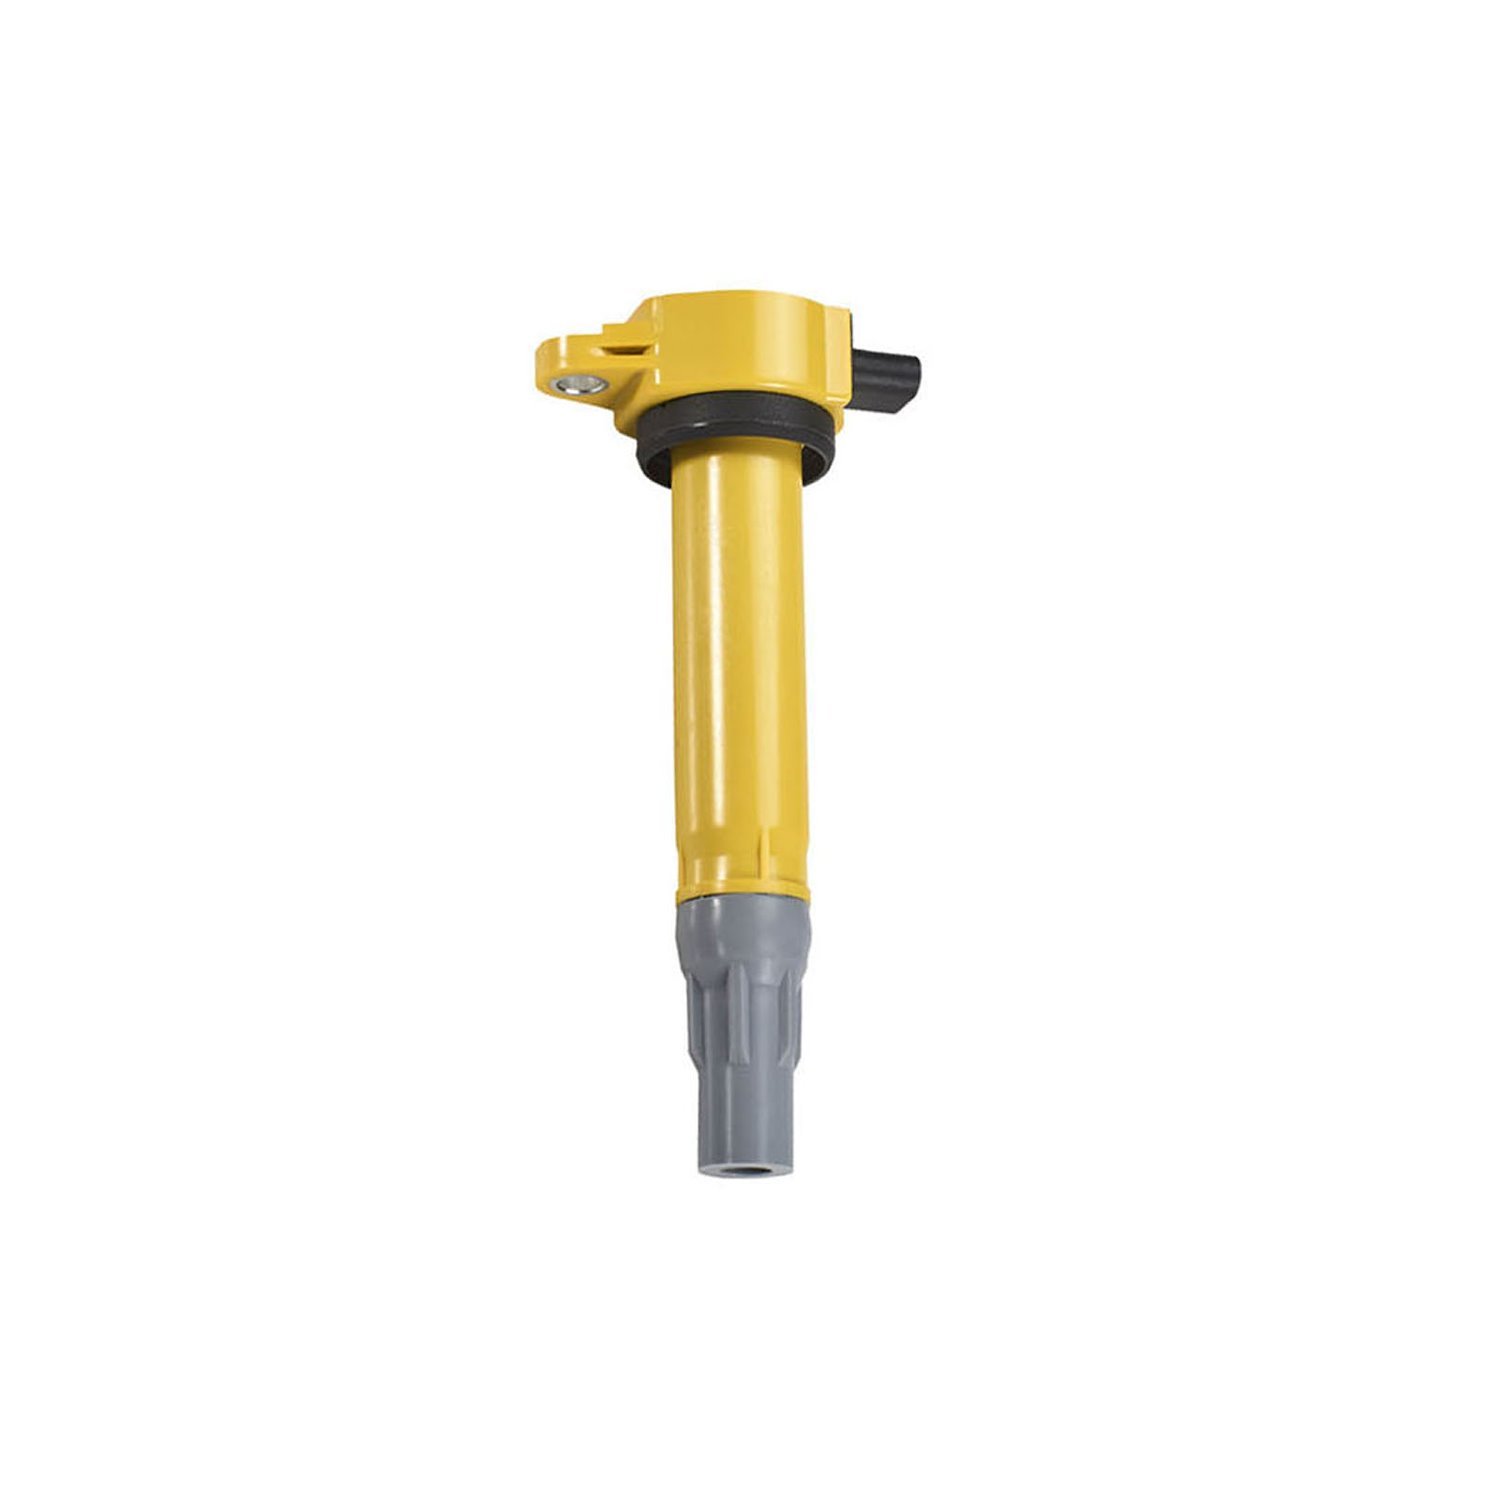 High-Performance Ignition Coil for 2006-2010 Chrysler/Dodge 4.0L/2.7L/3.5L [Yellow]